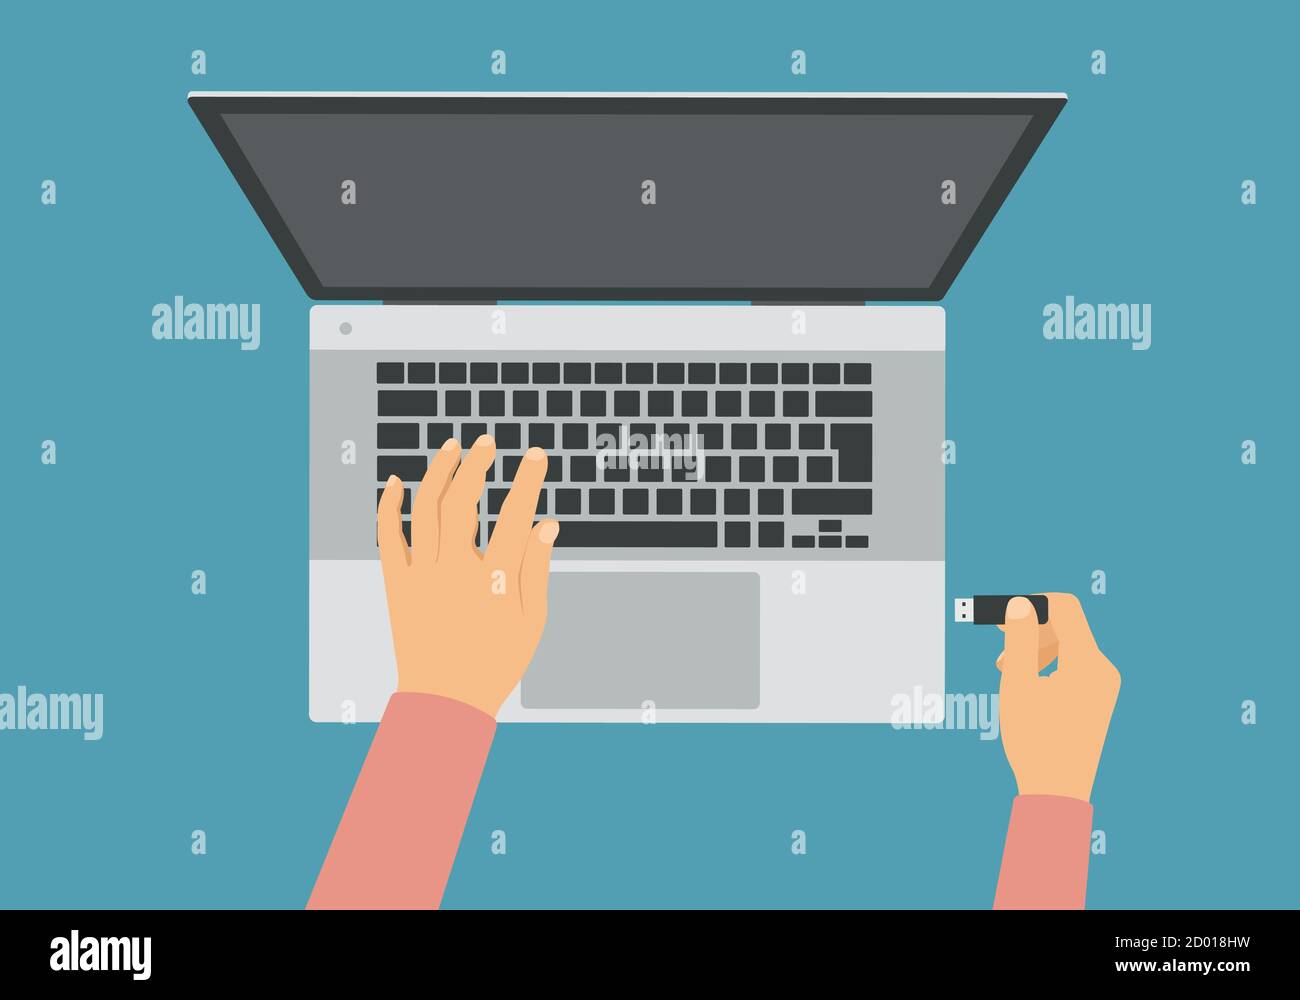 Illustration of a laptop and the hands of a man or woman. Holds the USB flash drive and plugs into a computer - vector Stock Vector